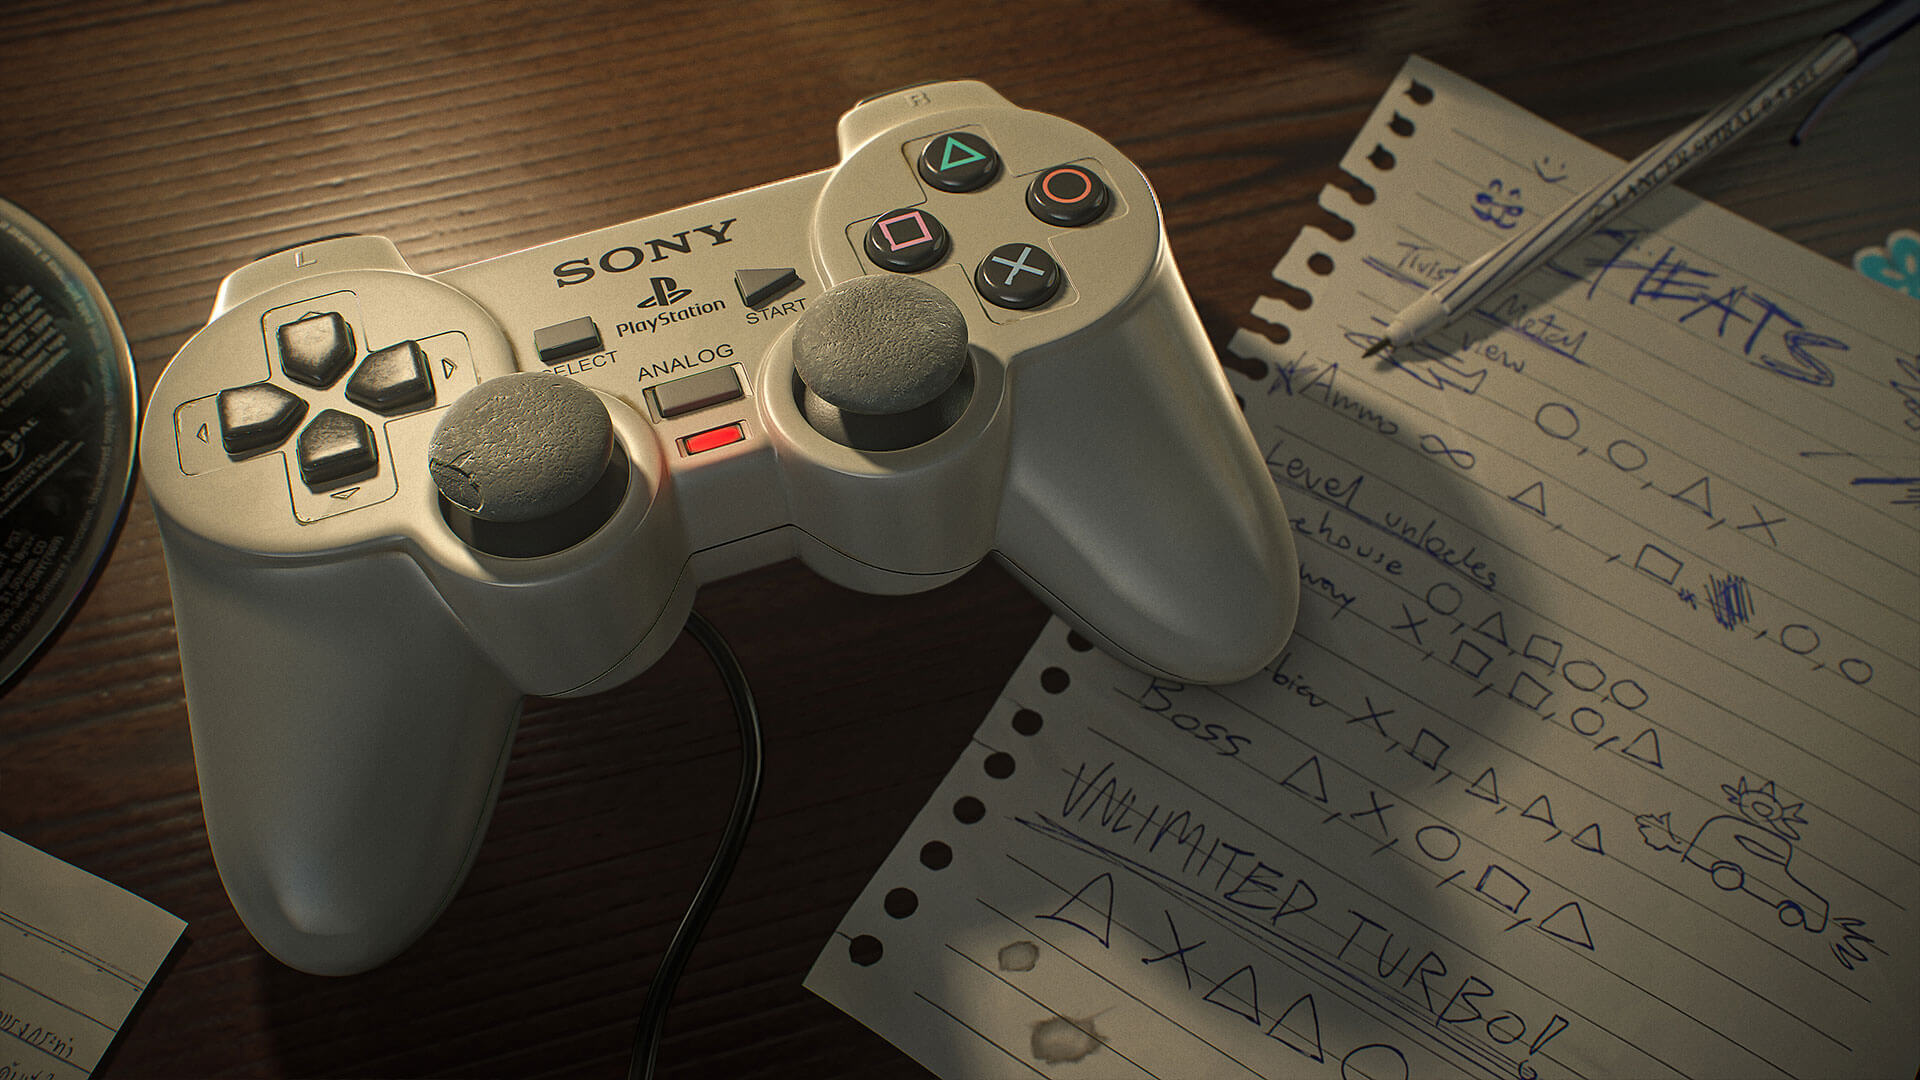 A PlayStation controller next to a paper with written cheat codes.